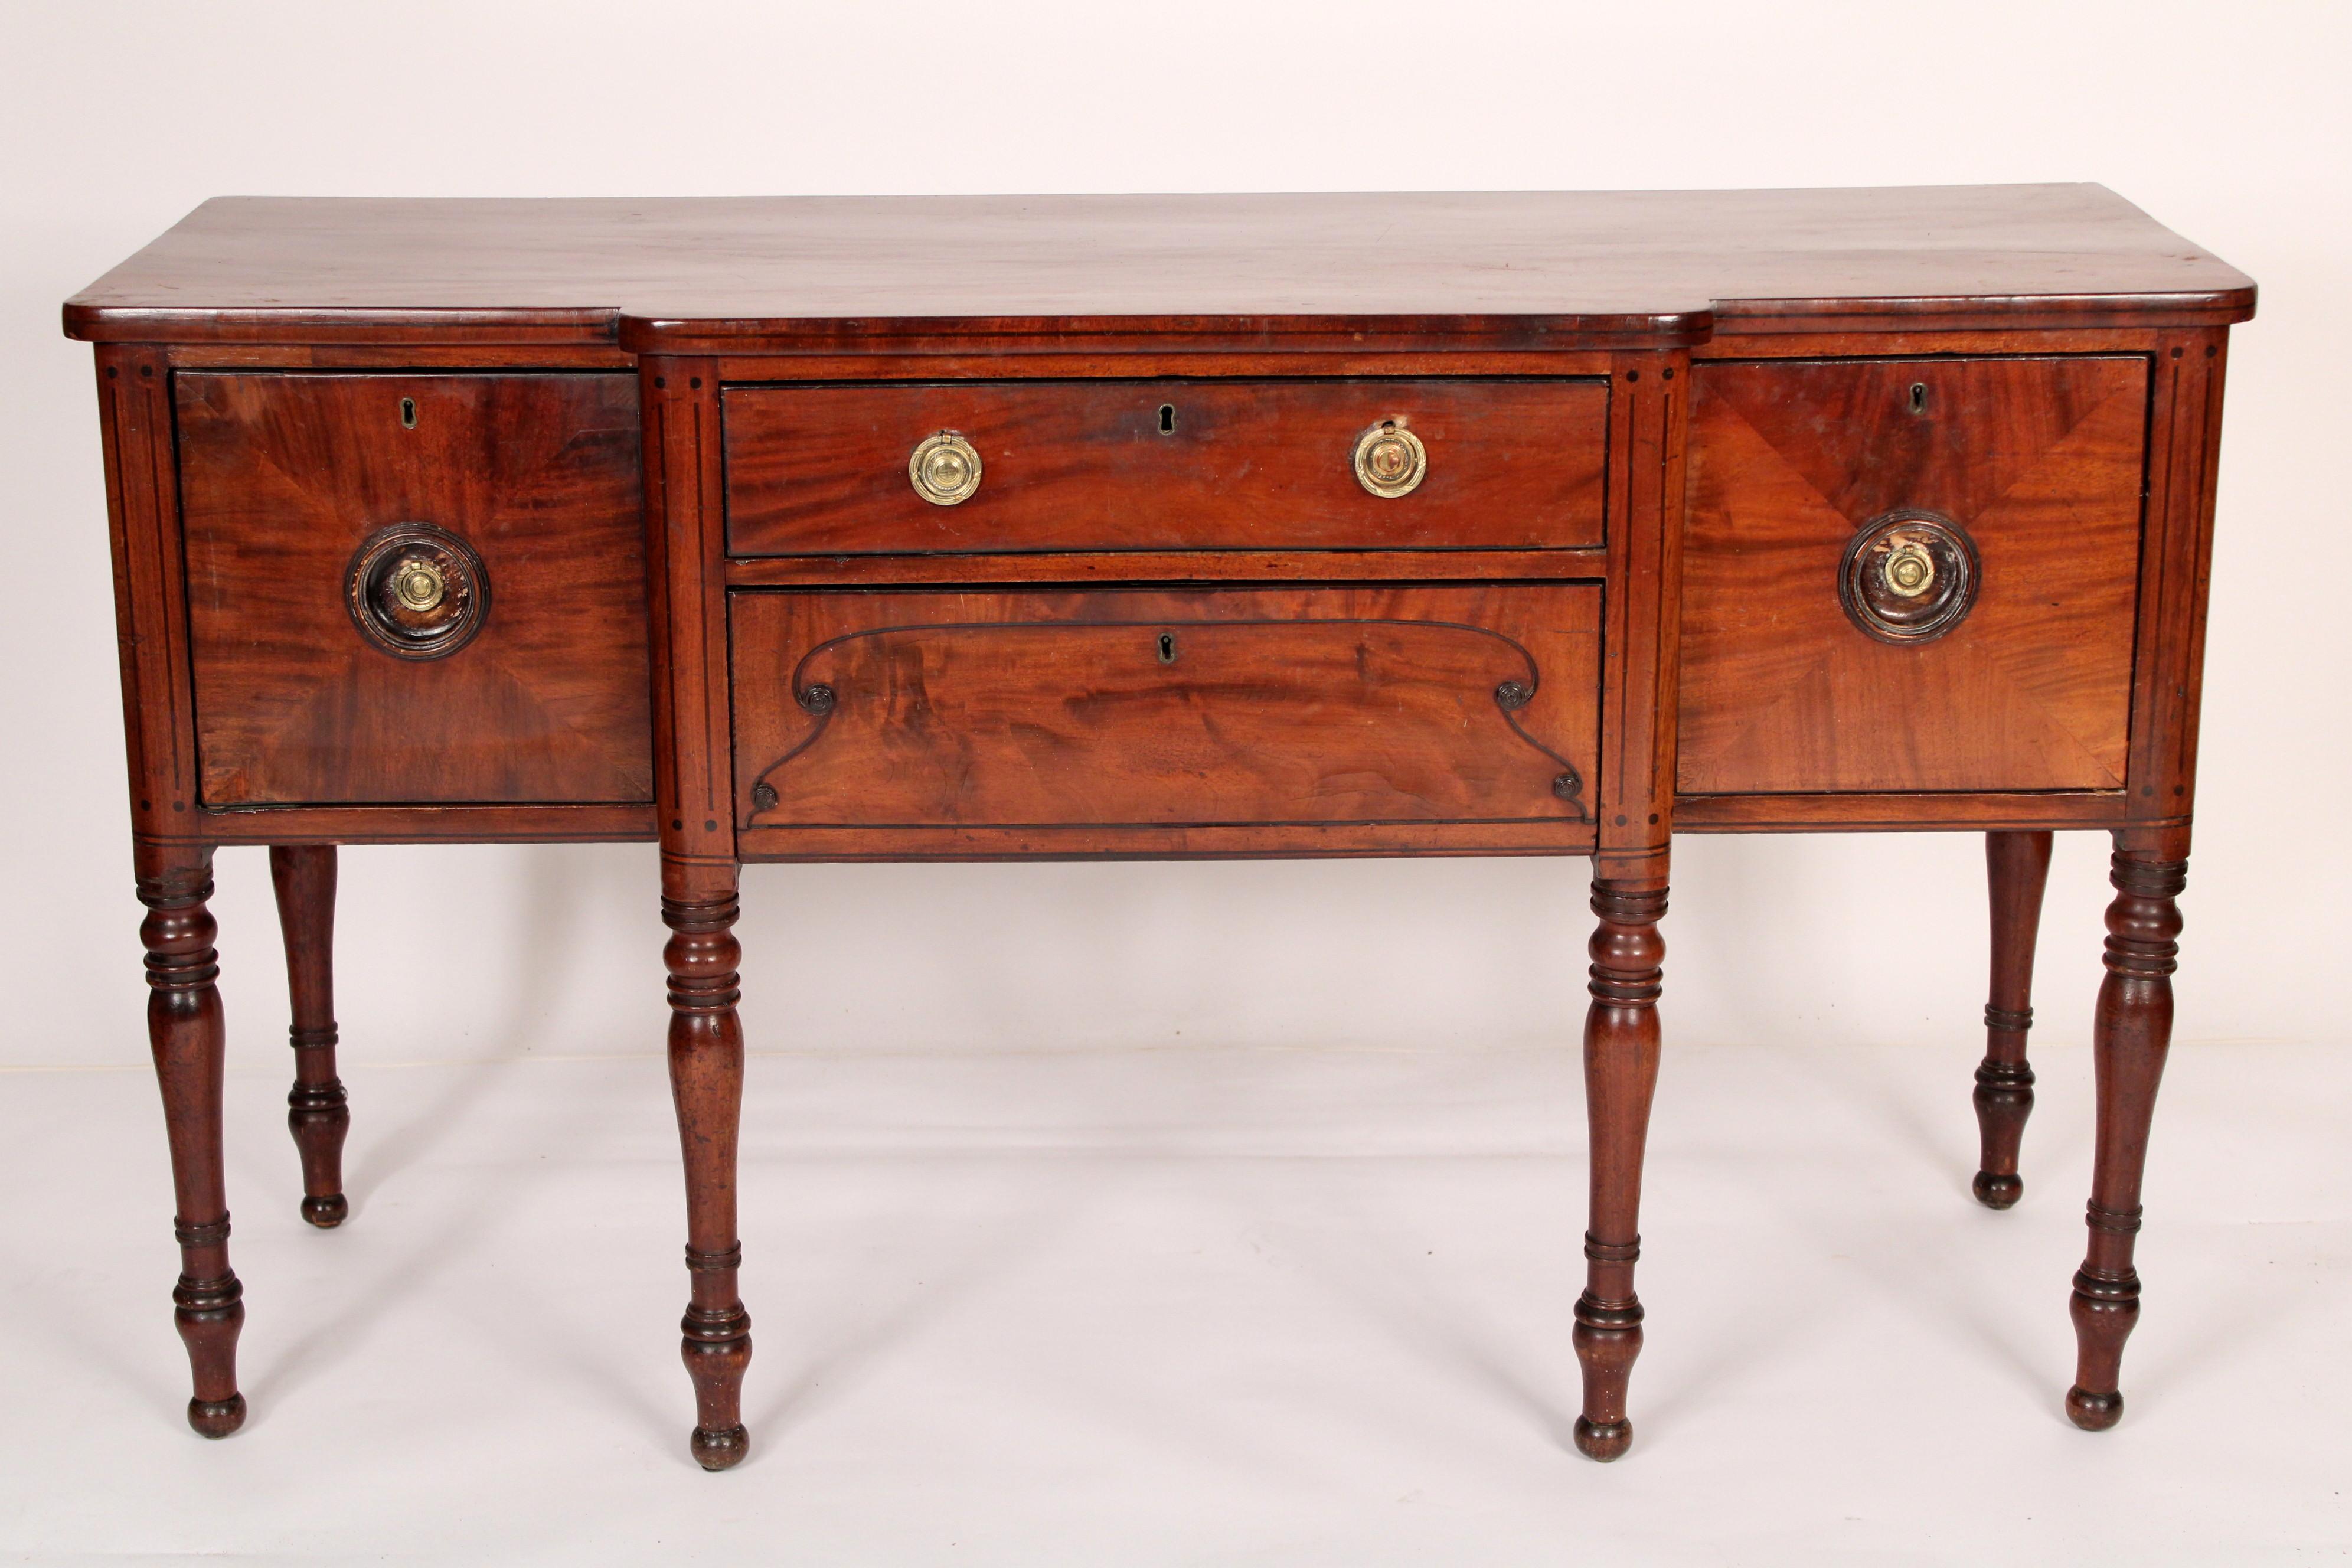 William IV mahogany sideboard, circa 1830.  The front having a door on the left side and a door on the right side the center section has two drawers. Resting on turned legs. Excellent quality mahogany used on the front drawers and door. The mahogany